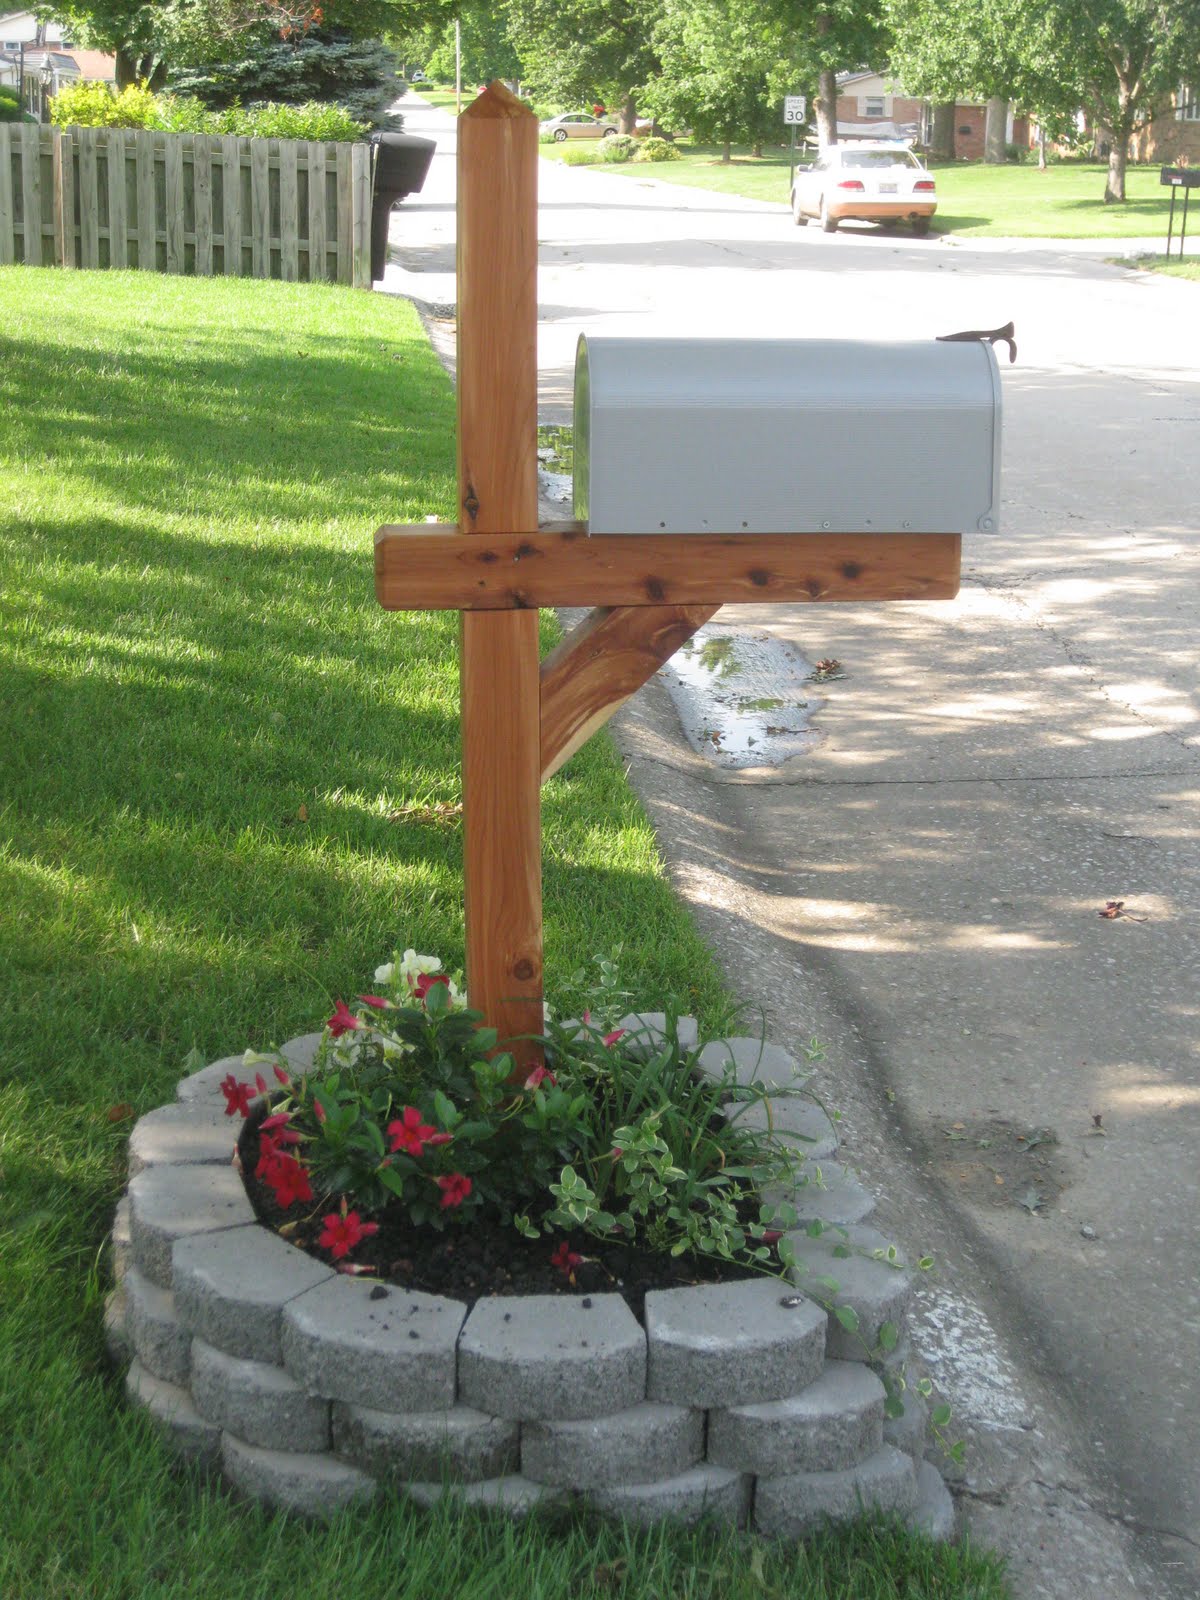 New andImproving?: Send us Cards in our pretty new Mailbox!!